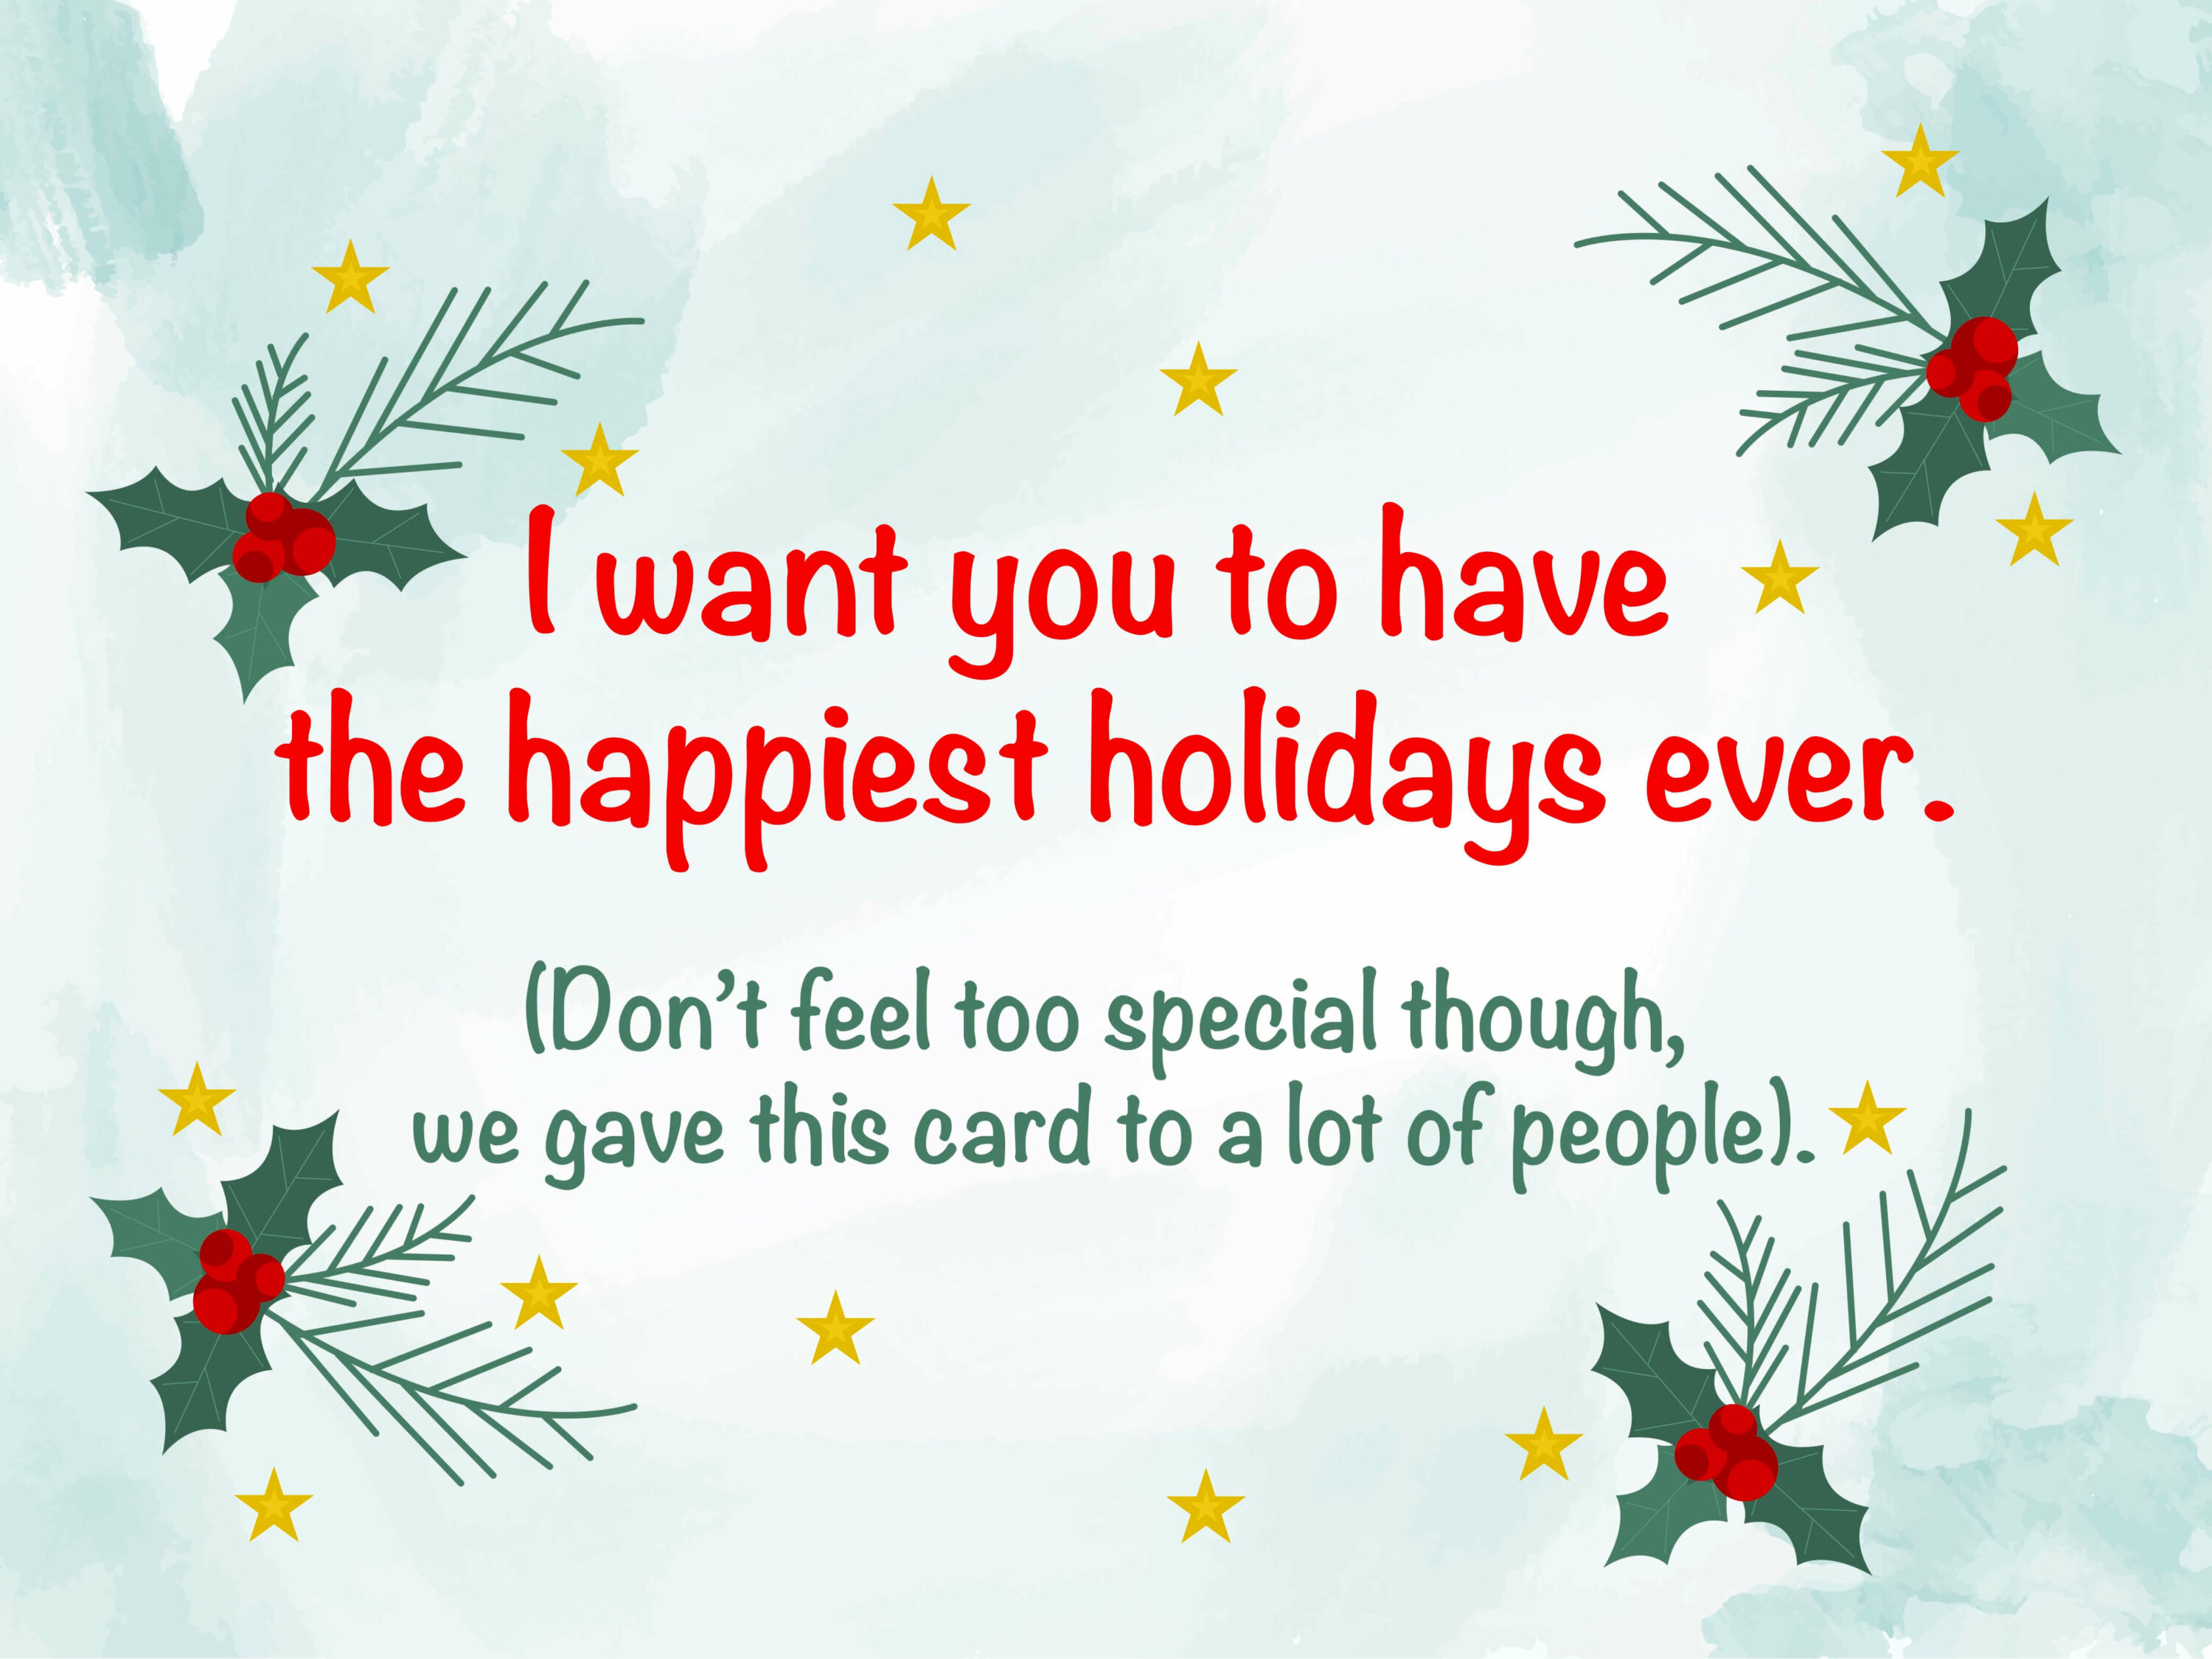 Free Christmas Card: I Want You to Have the Happiest Holidays Ever.